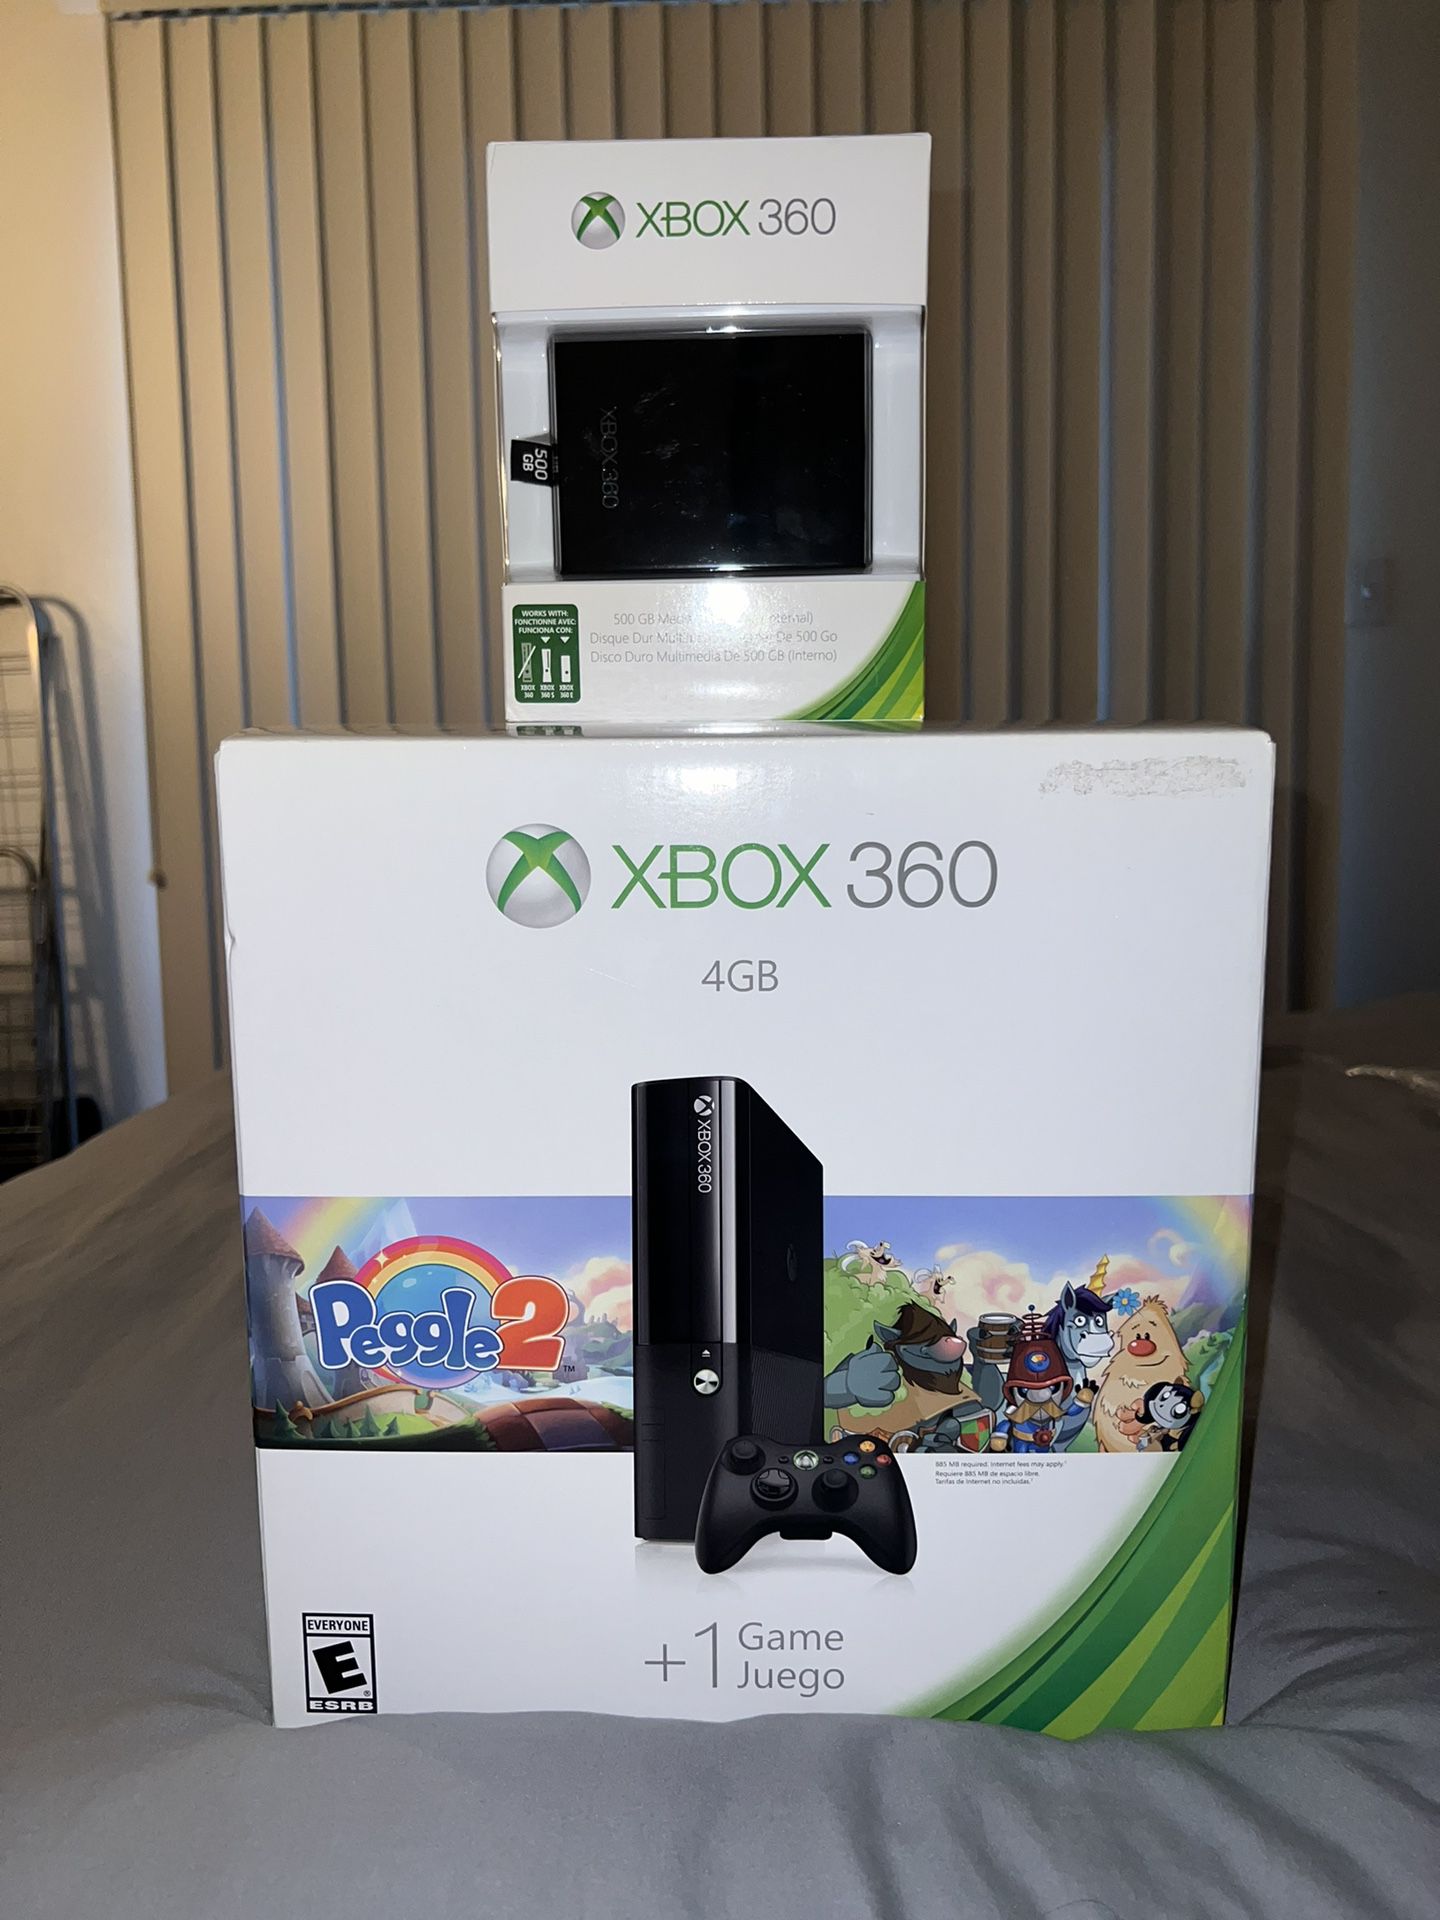 Used “ONLY 1 Time” Xbox 360 E. + “Used 1 Time” Official Microsoft 500GB Hard Drive